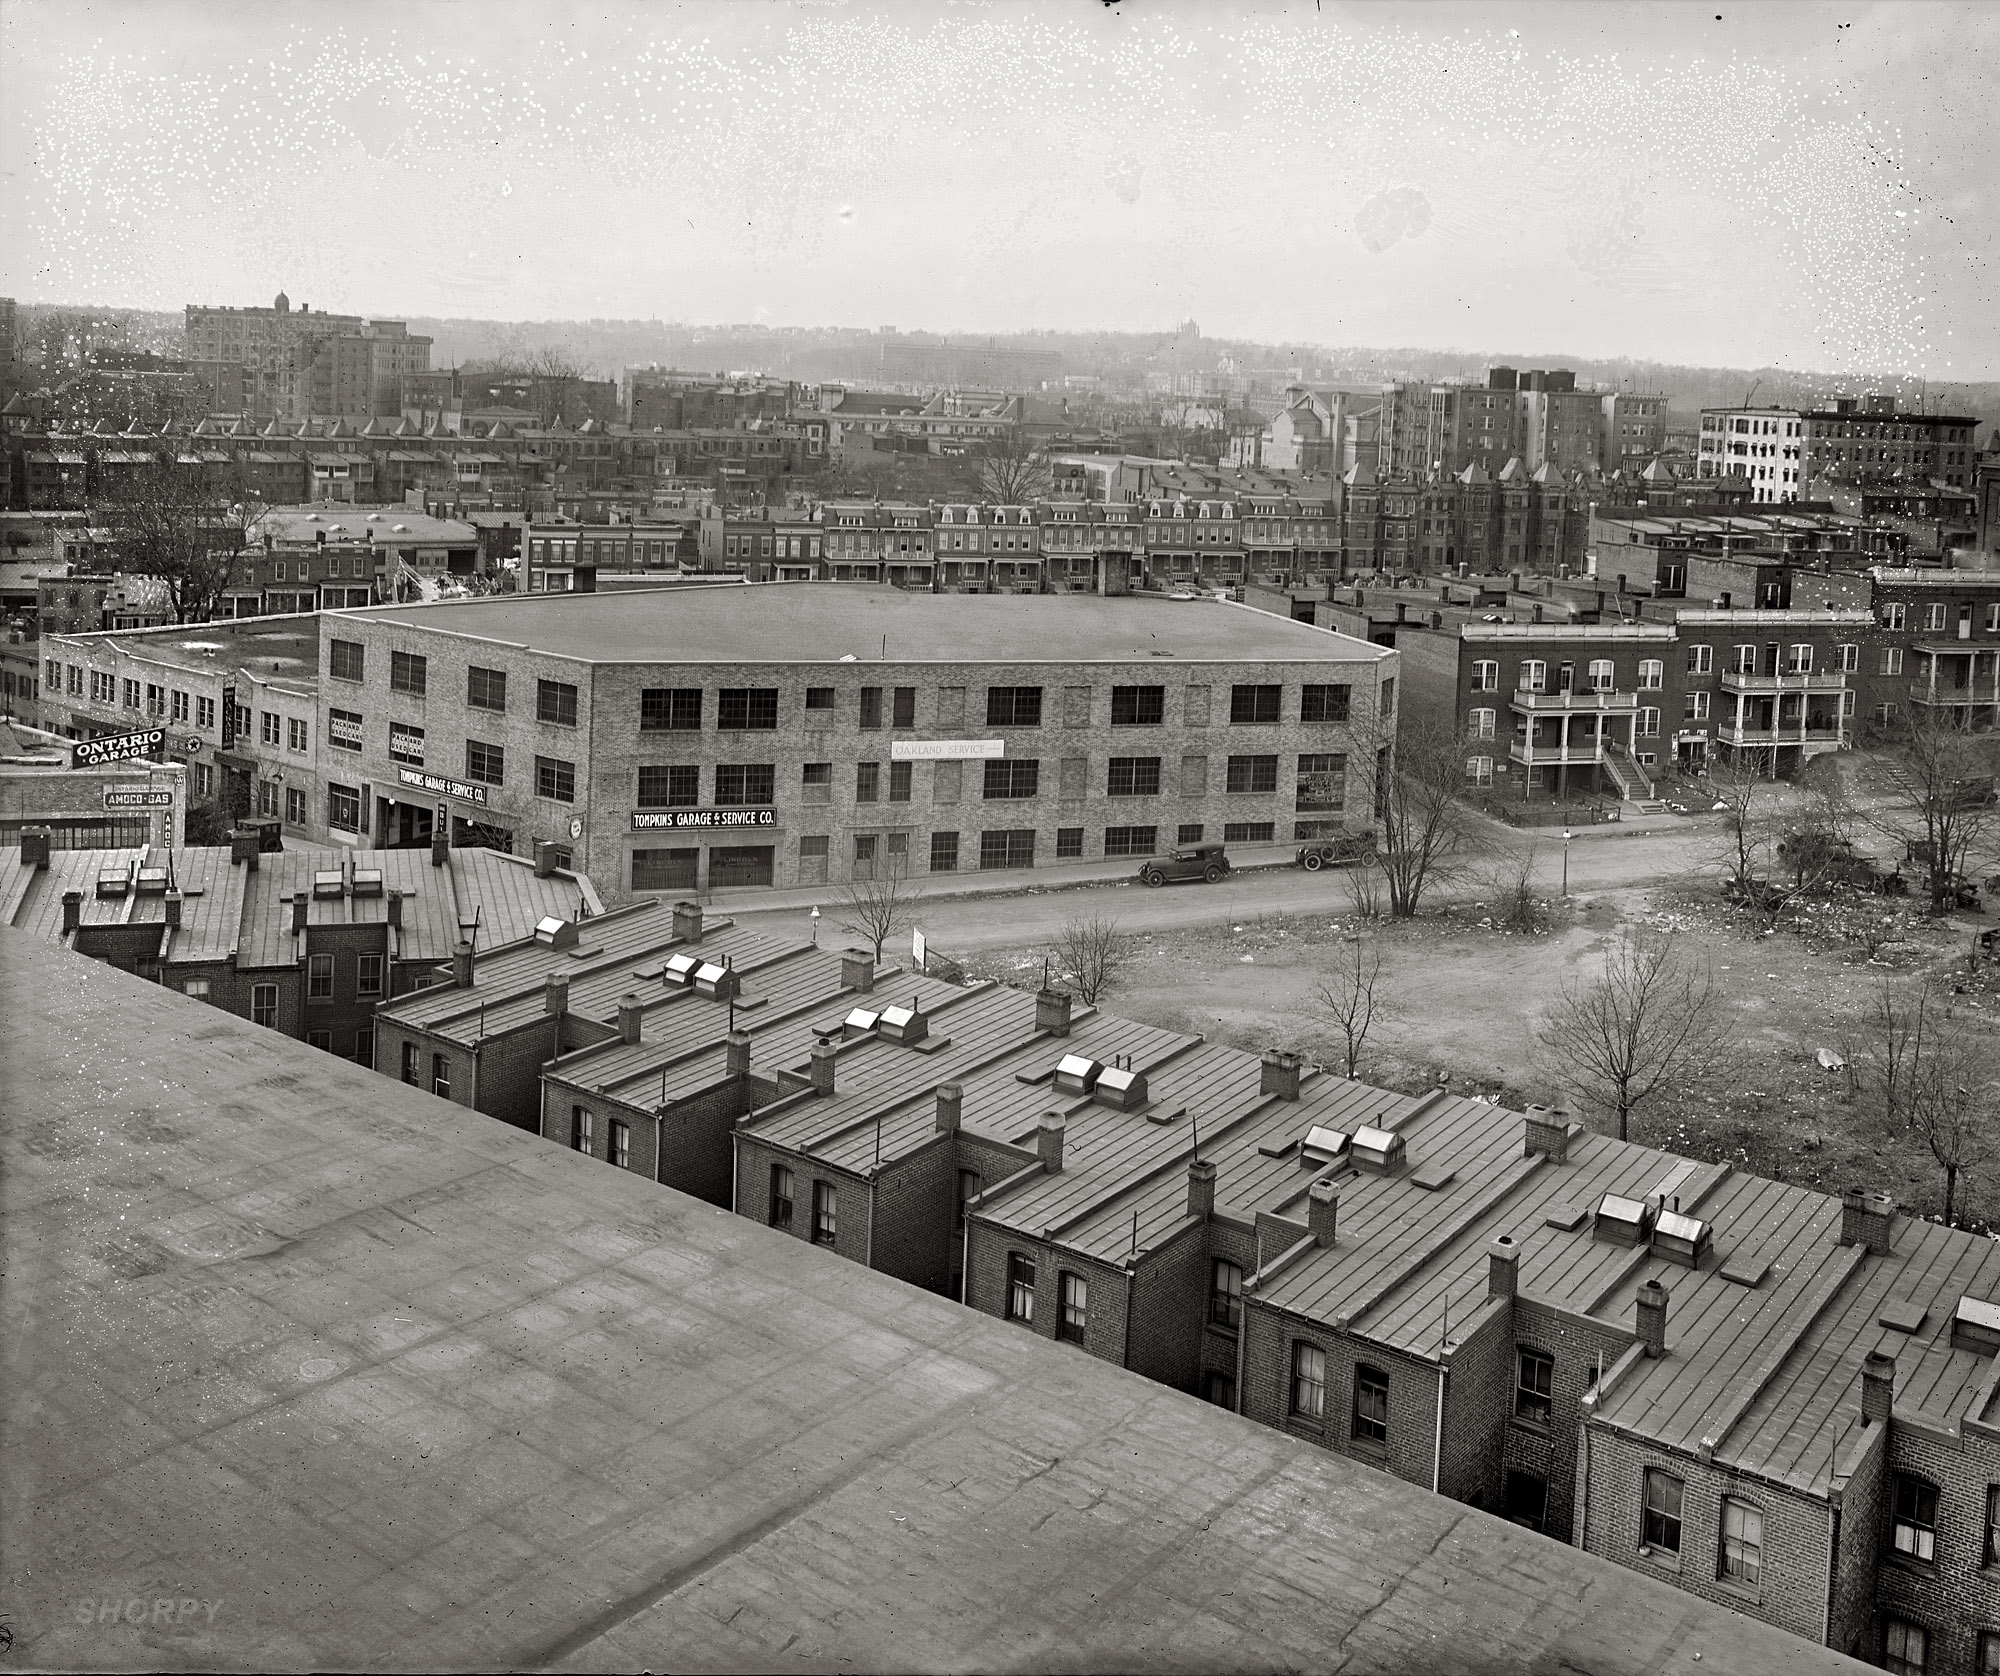 Washington, D.C., circa 1926. "Toward St. Albans from 2400 16th Street." National Photo Company Collection glass negative. View full size.